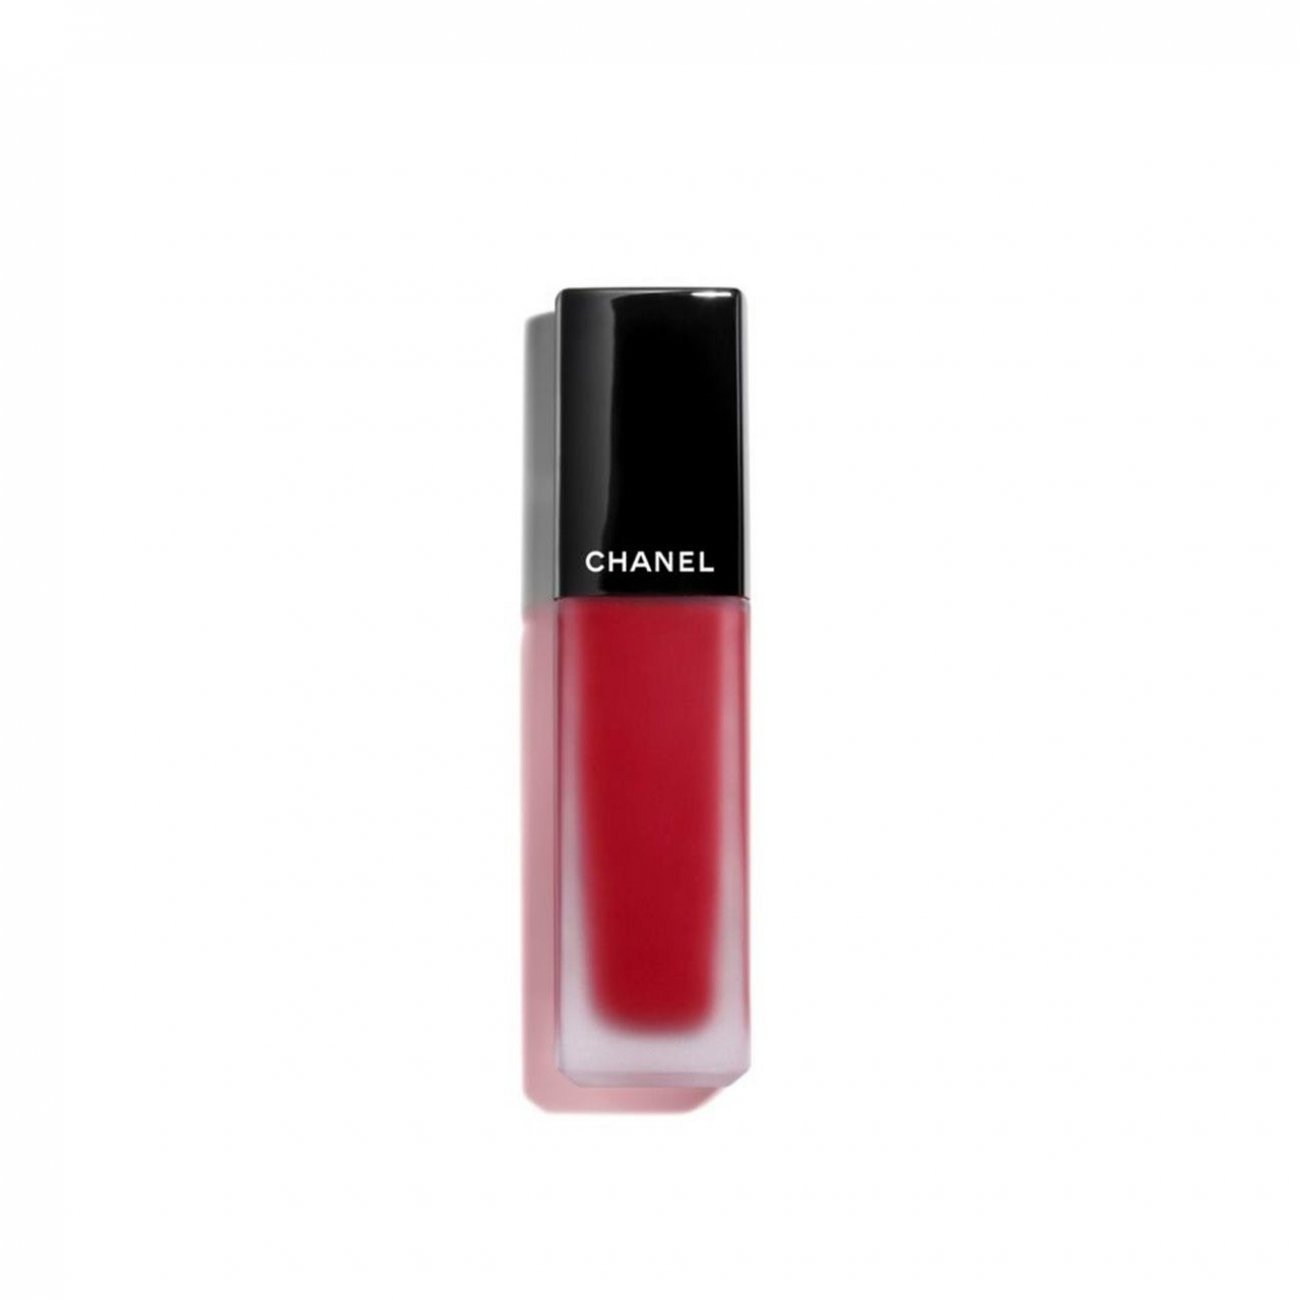 Reviewed Chanels Rouge Allure Is a Standout Red Lipstick